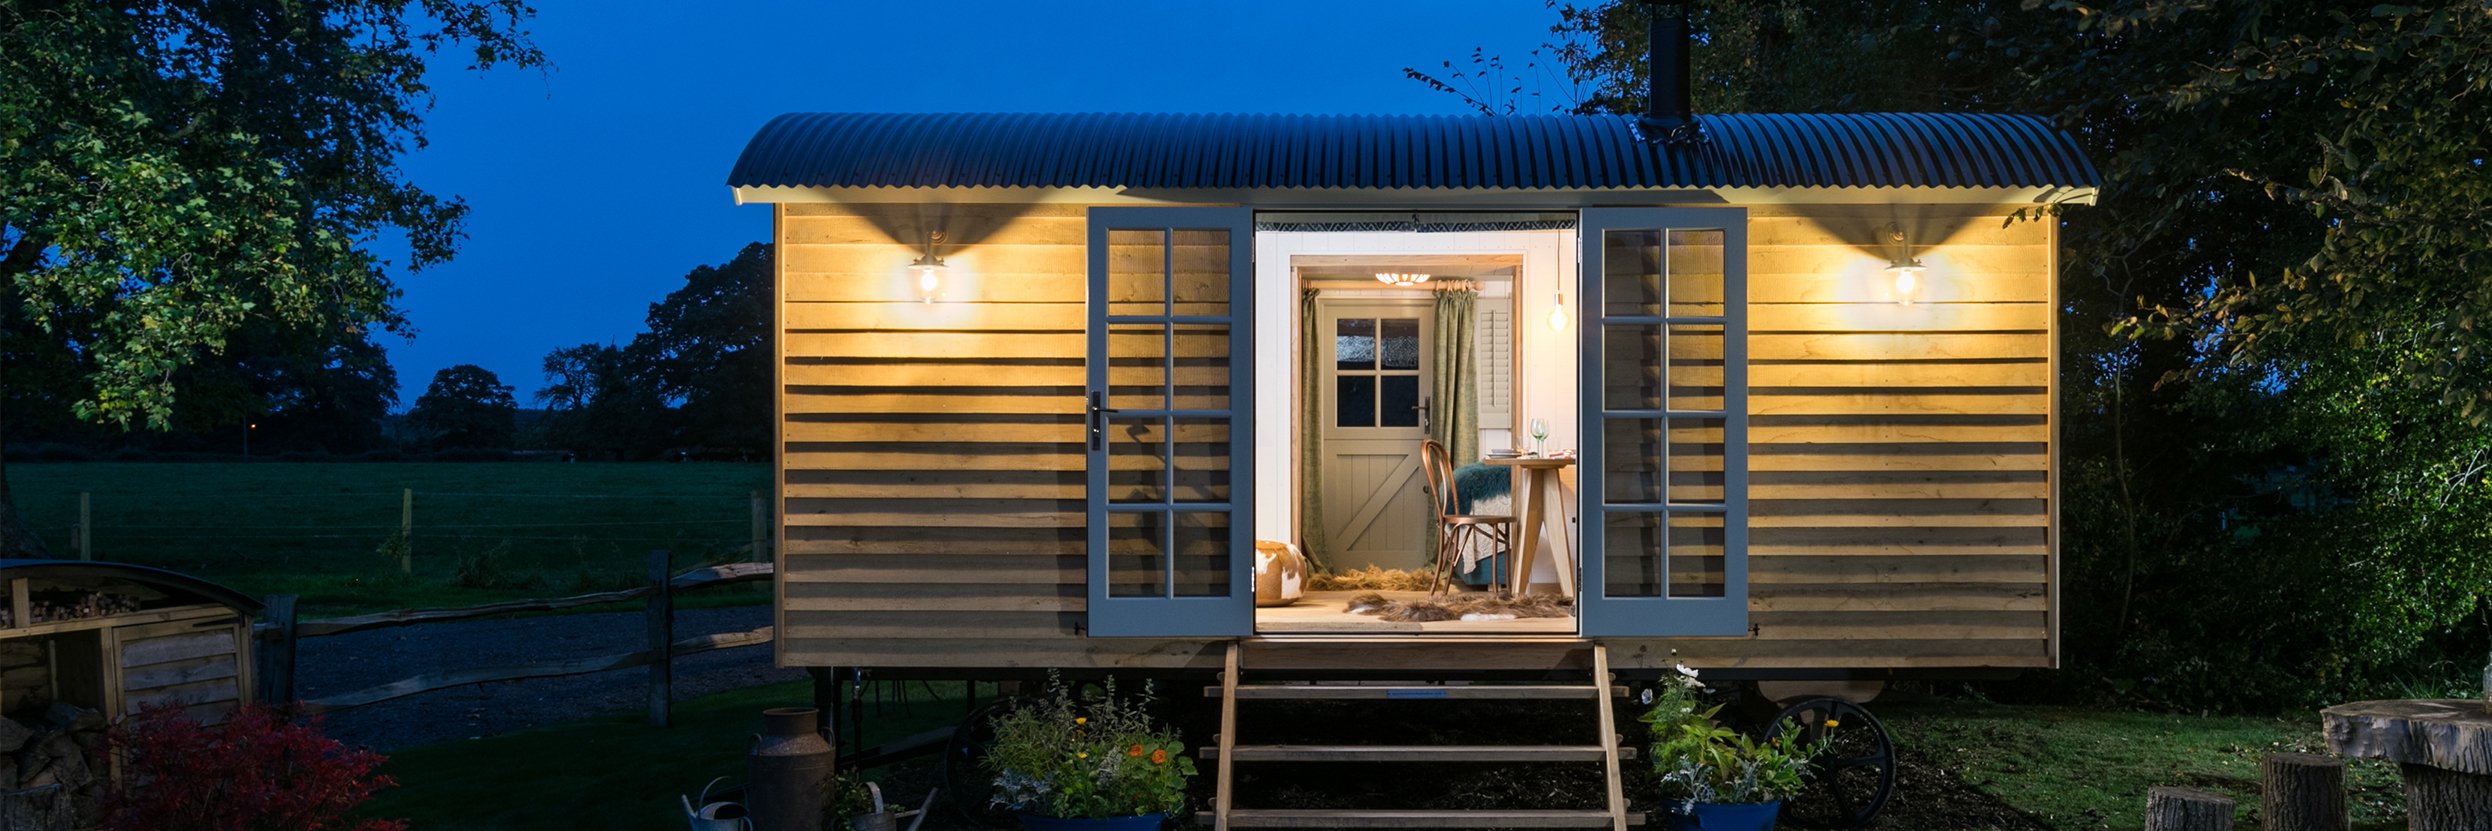 Charming Shepards hut in a garden, featuring stylish outdoor lighting.